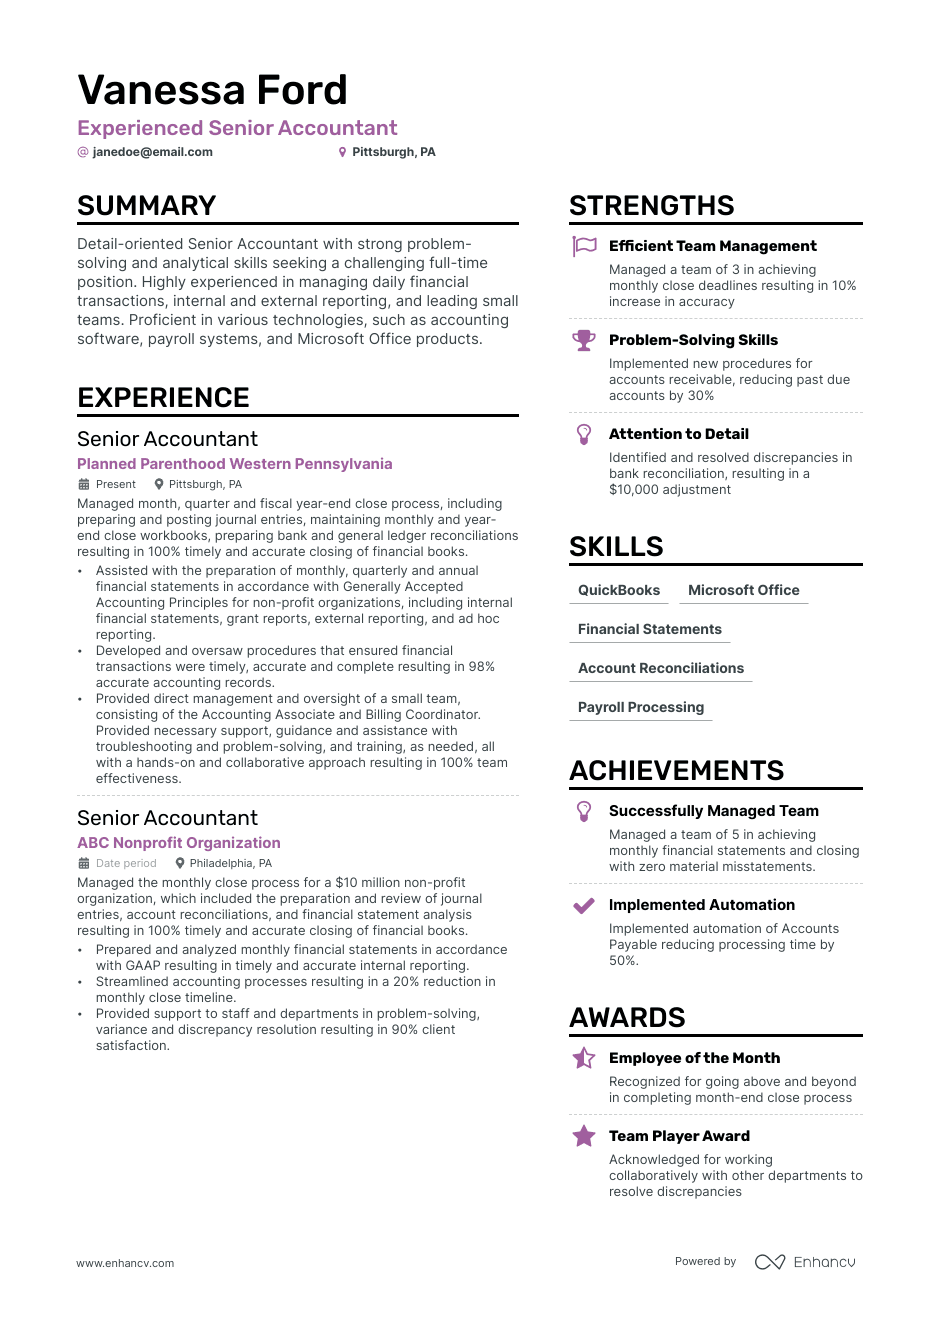 Full cycle accountant resume example